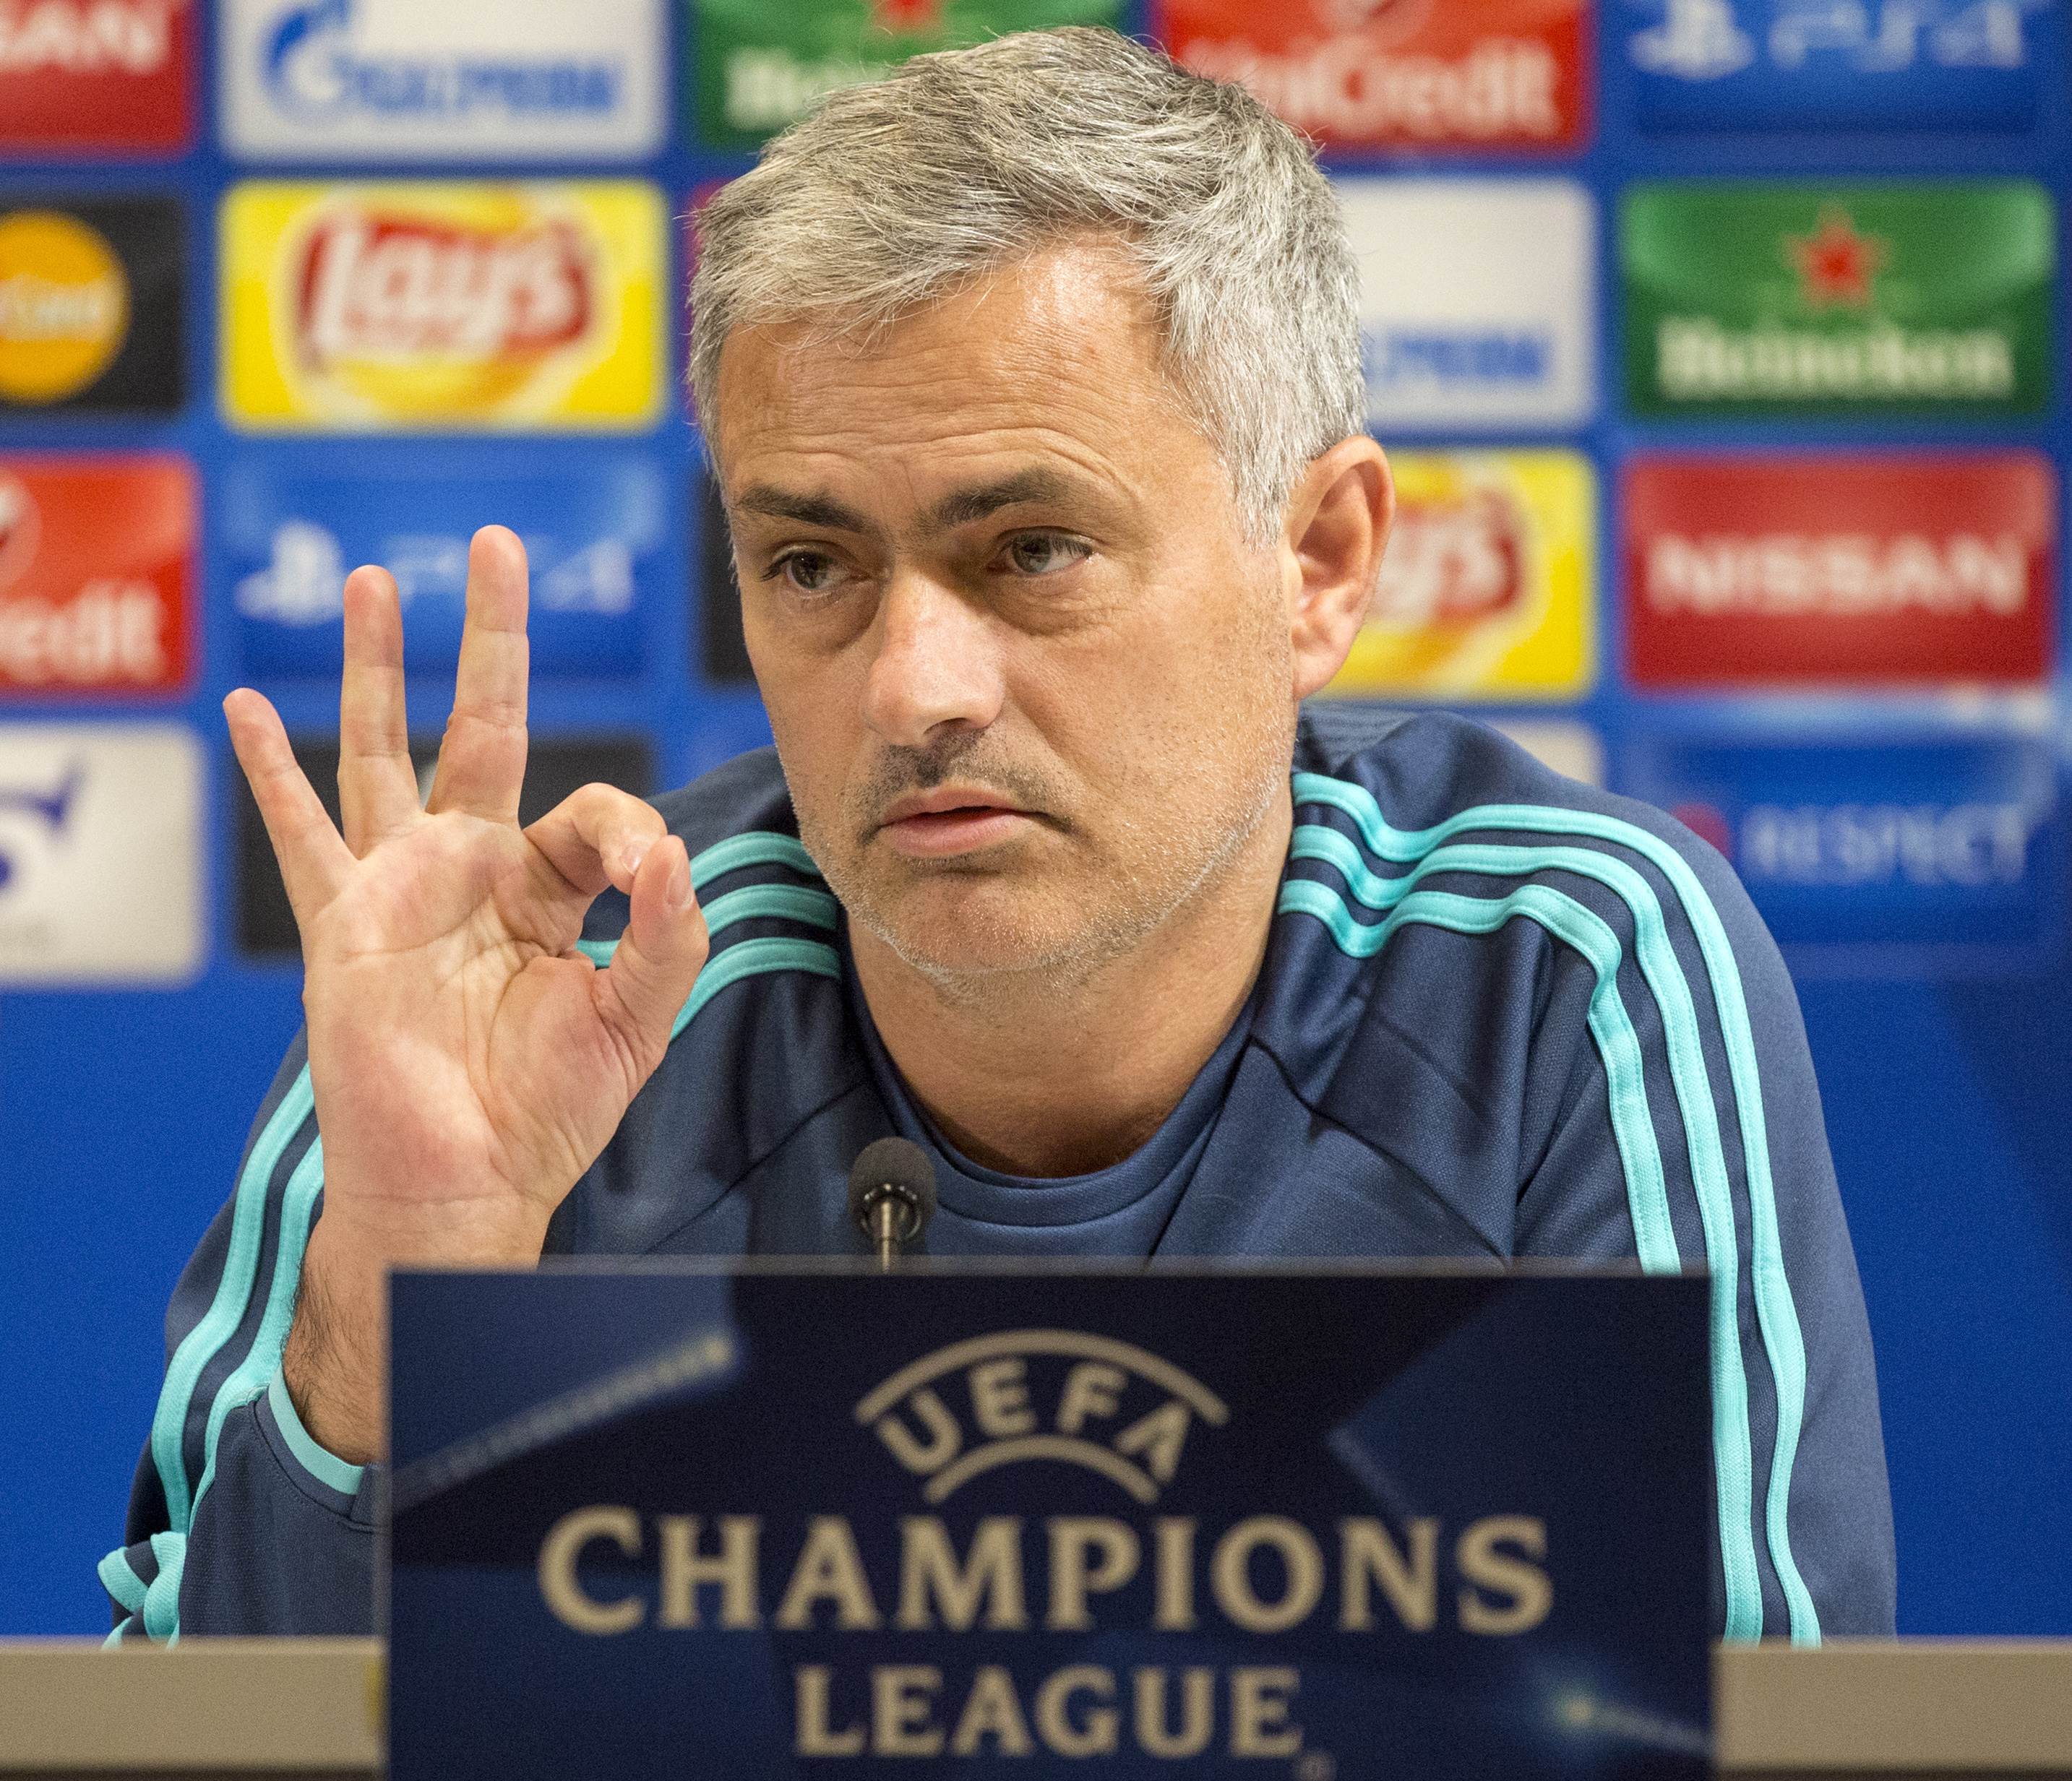 Chelsea's Portuguese Head Coach Jose Mourinho gestures during a press conference at the Sammy Ofer Stadium in the Israeli coastal city of Haifa on November 23, 2015, on the eve of their UEFA Champions League group G match against Maccabi Tel Aviv. AFP PHOTO / JACK GUEZ